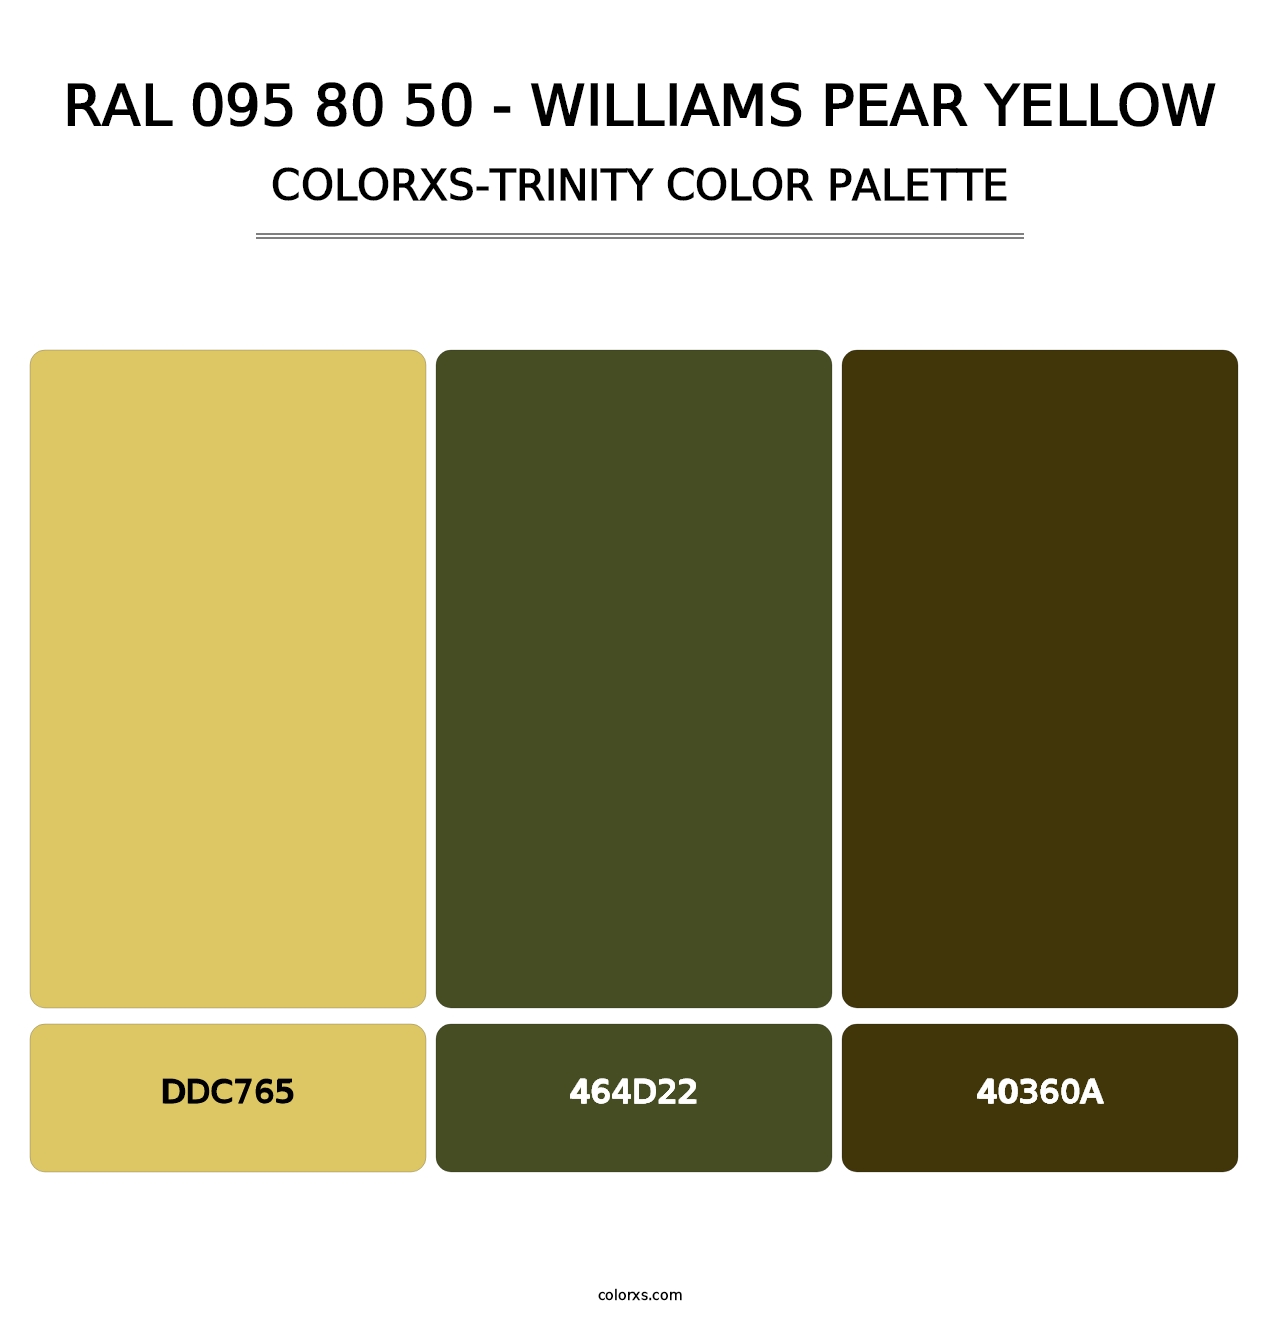 RAL 095 80 50 - Williams Pear Yellow - Colorxs Trinity Palette